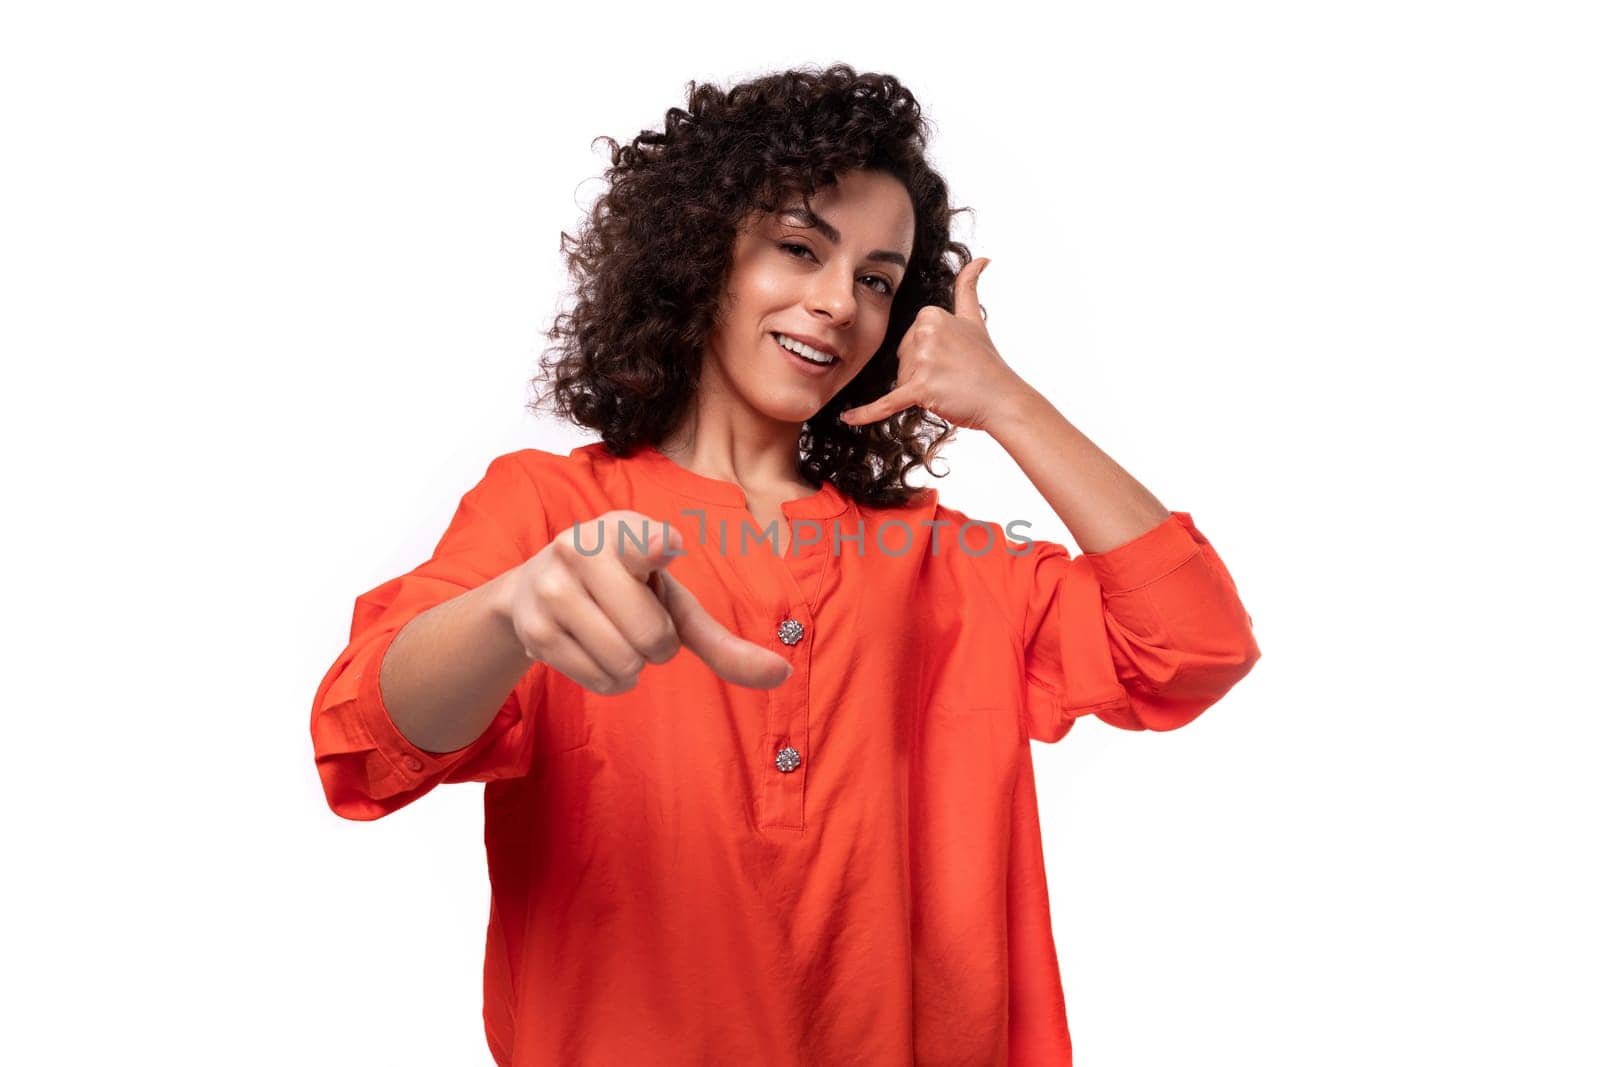 young caucasian lady with black curly hair dressed in an orange blouse points her finger at the camera.